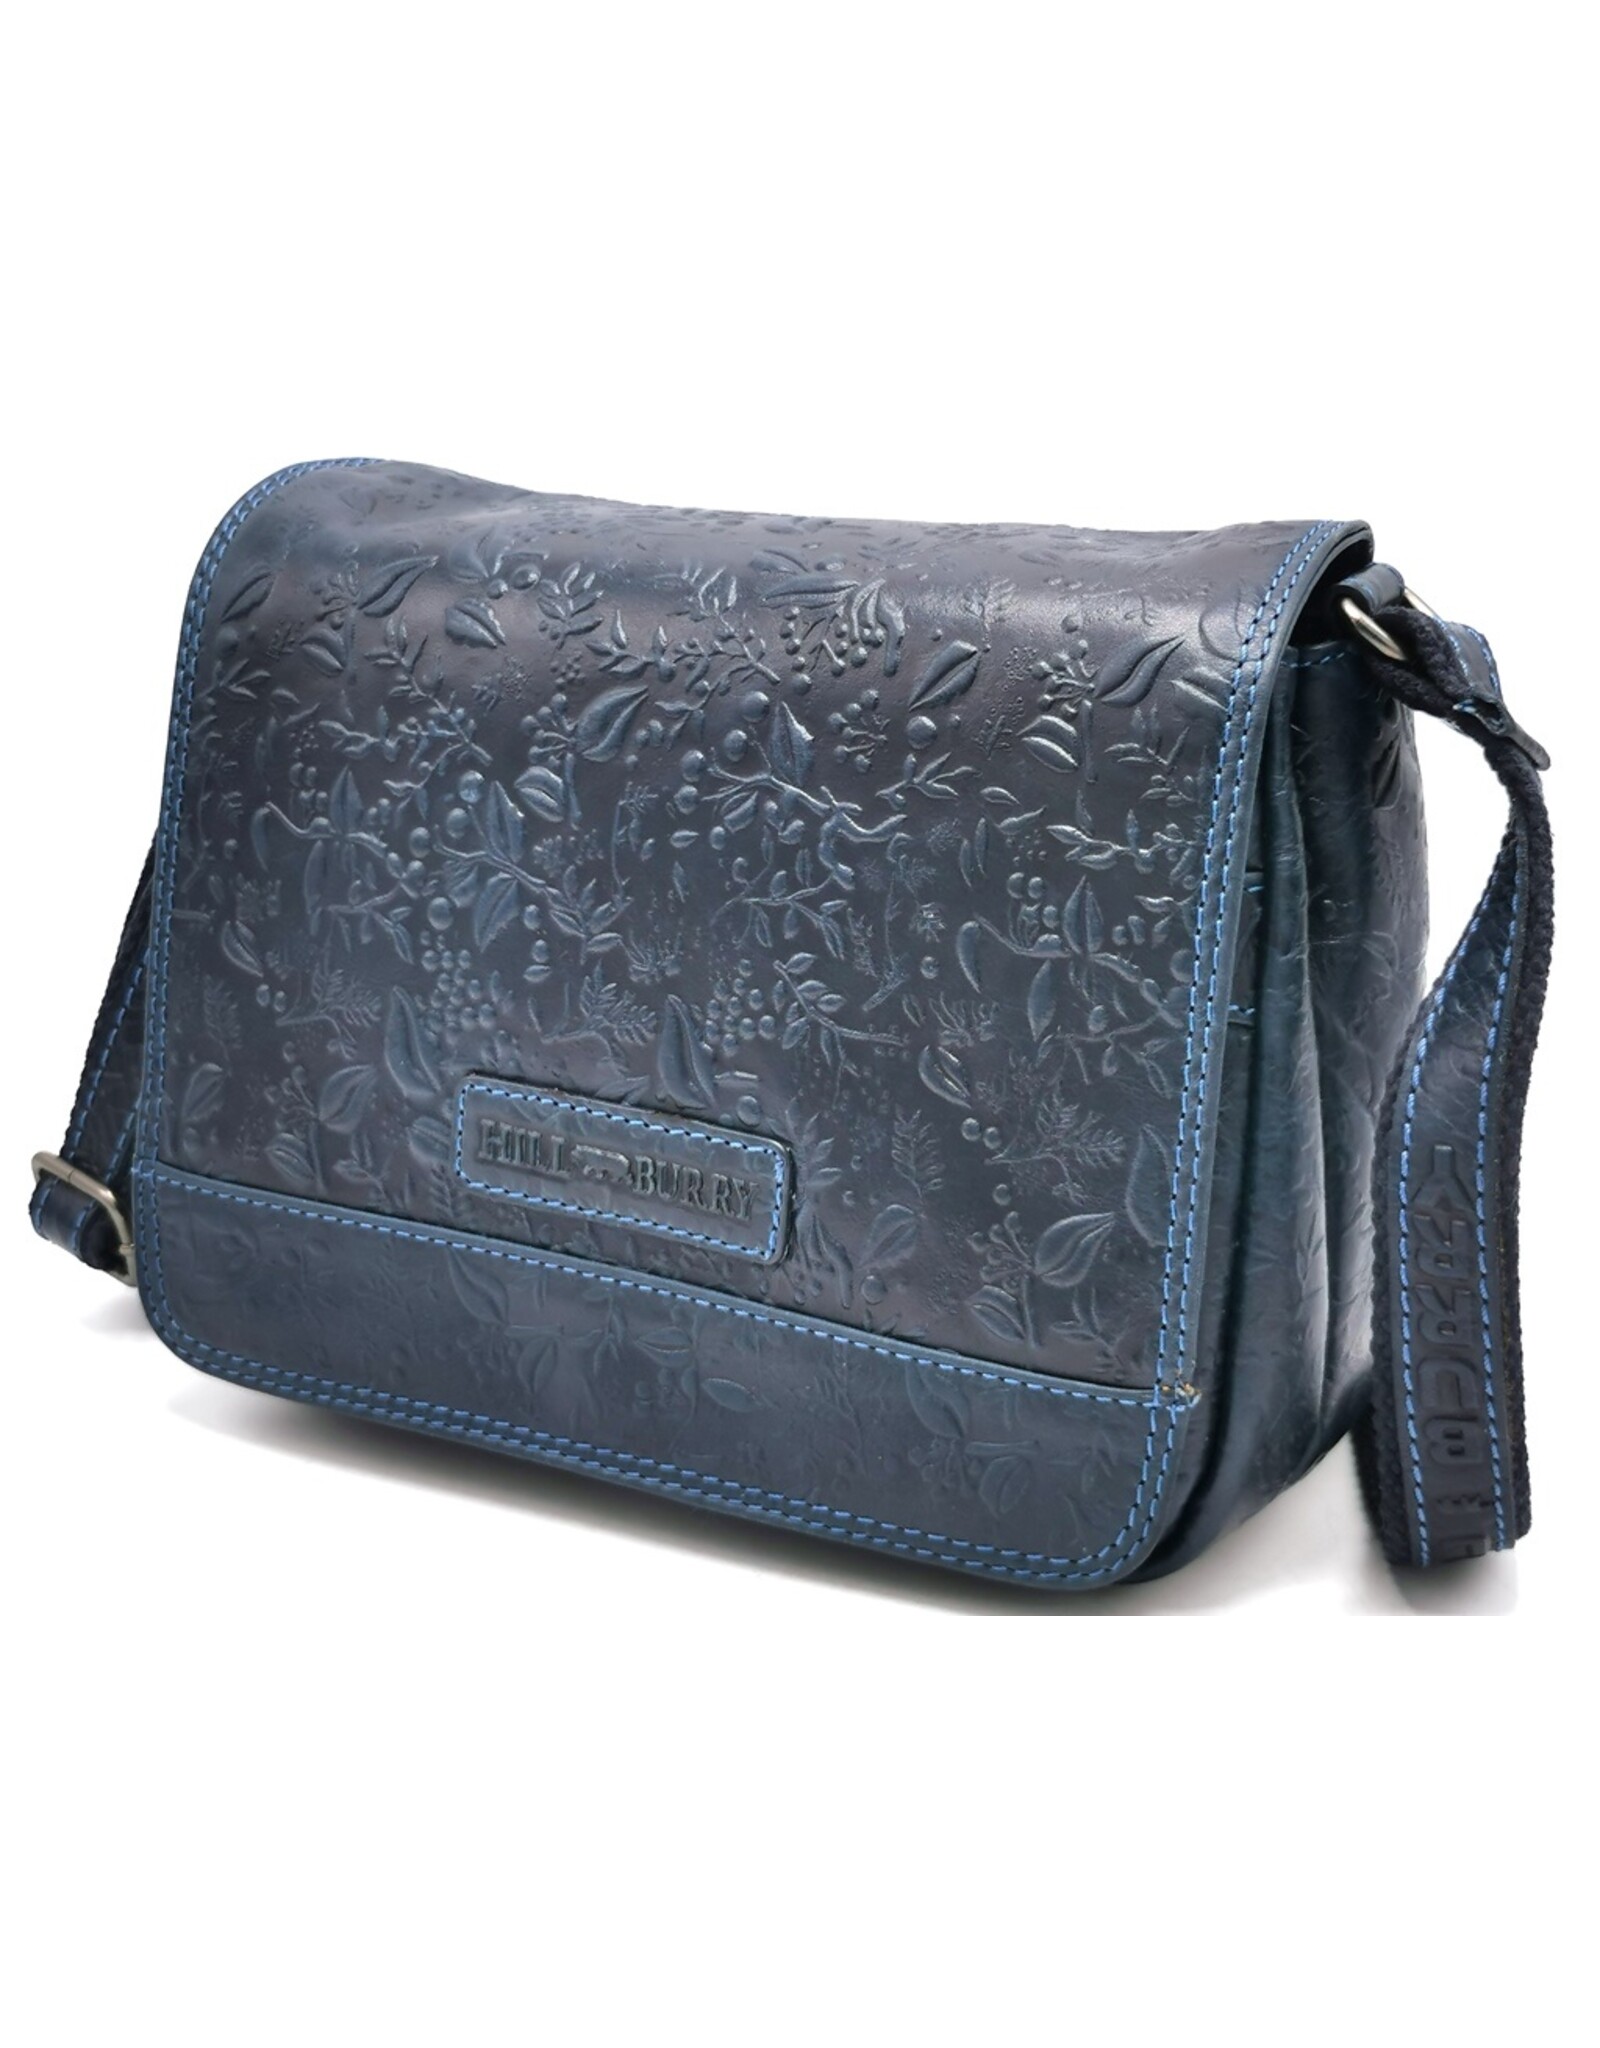 HillBurry Leather bags - Hillburry Shoulder Bag with Embossed Leaves blue